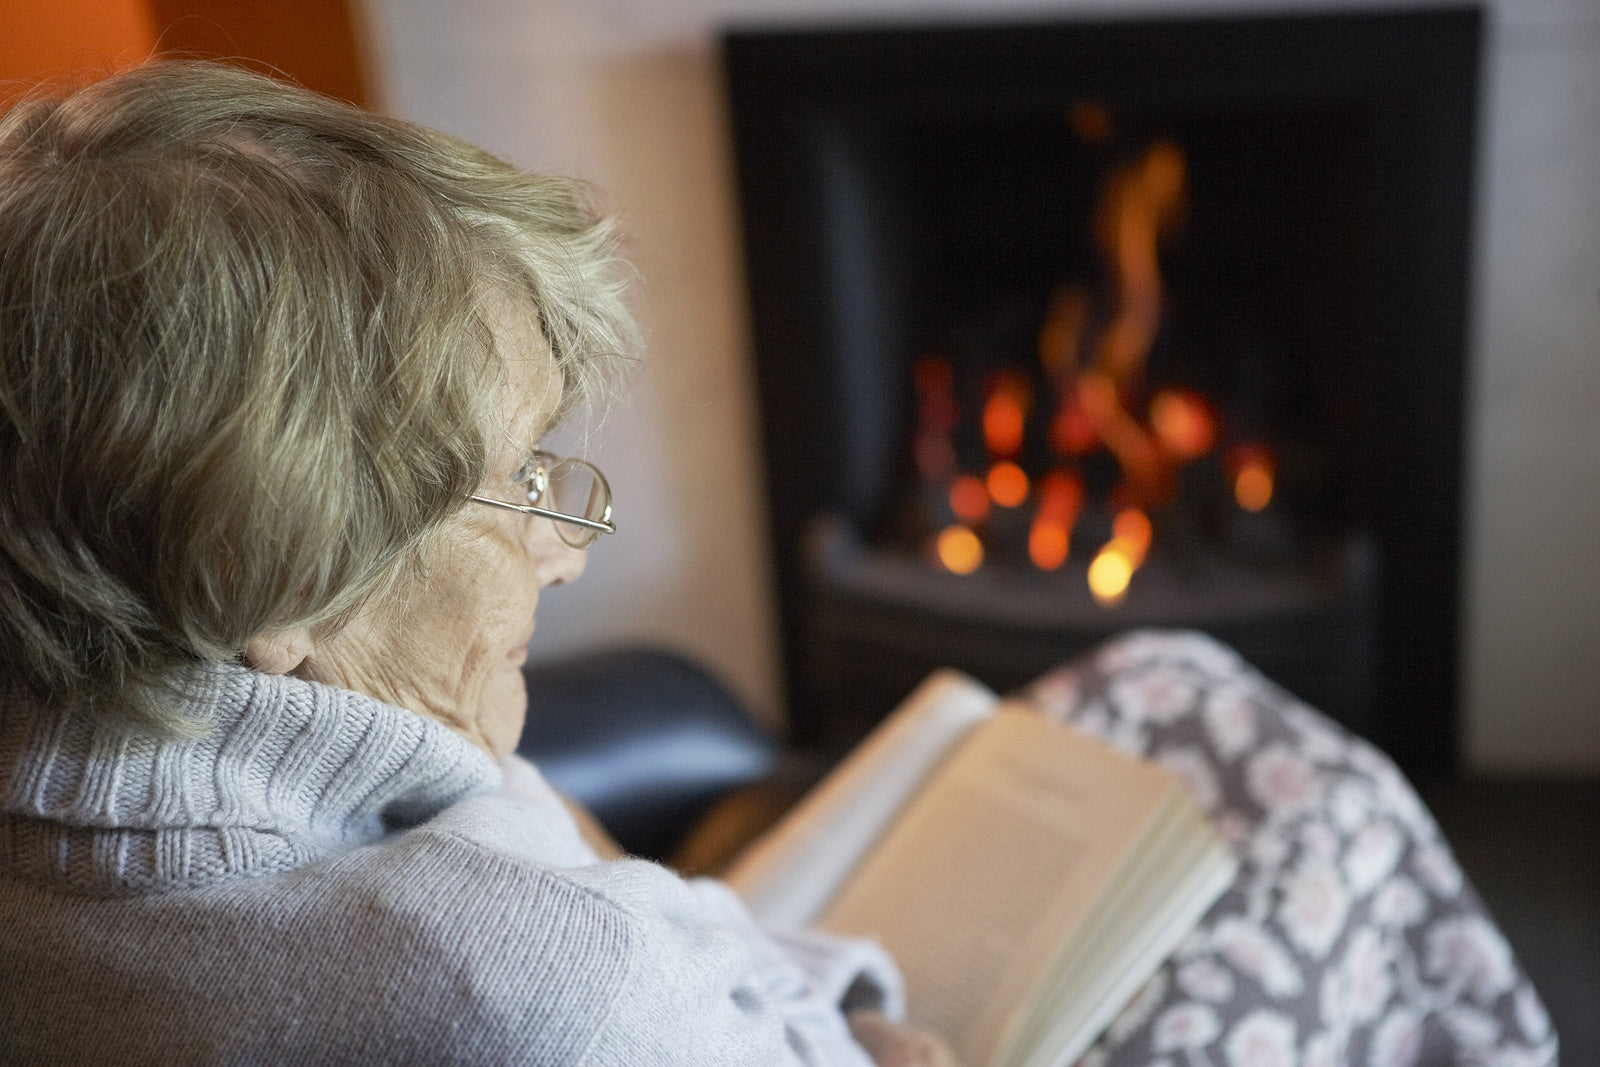 Senior Safety Tips: Staying Warm Inside & Outside